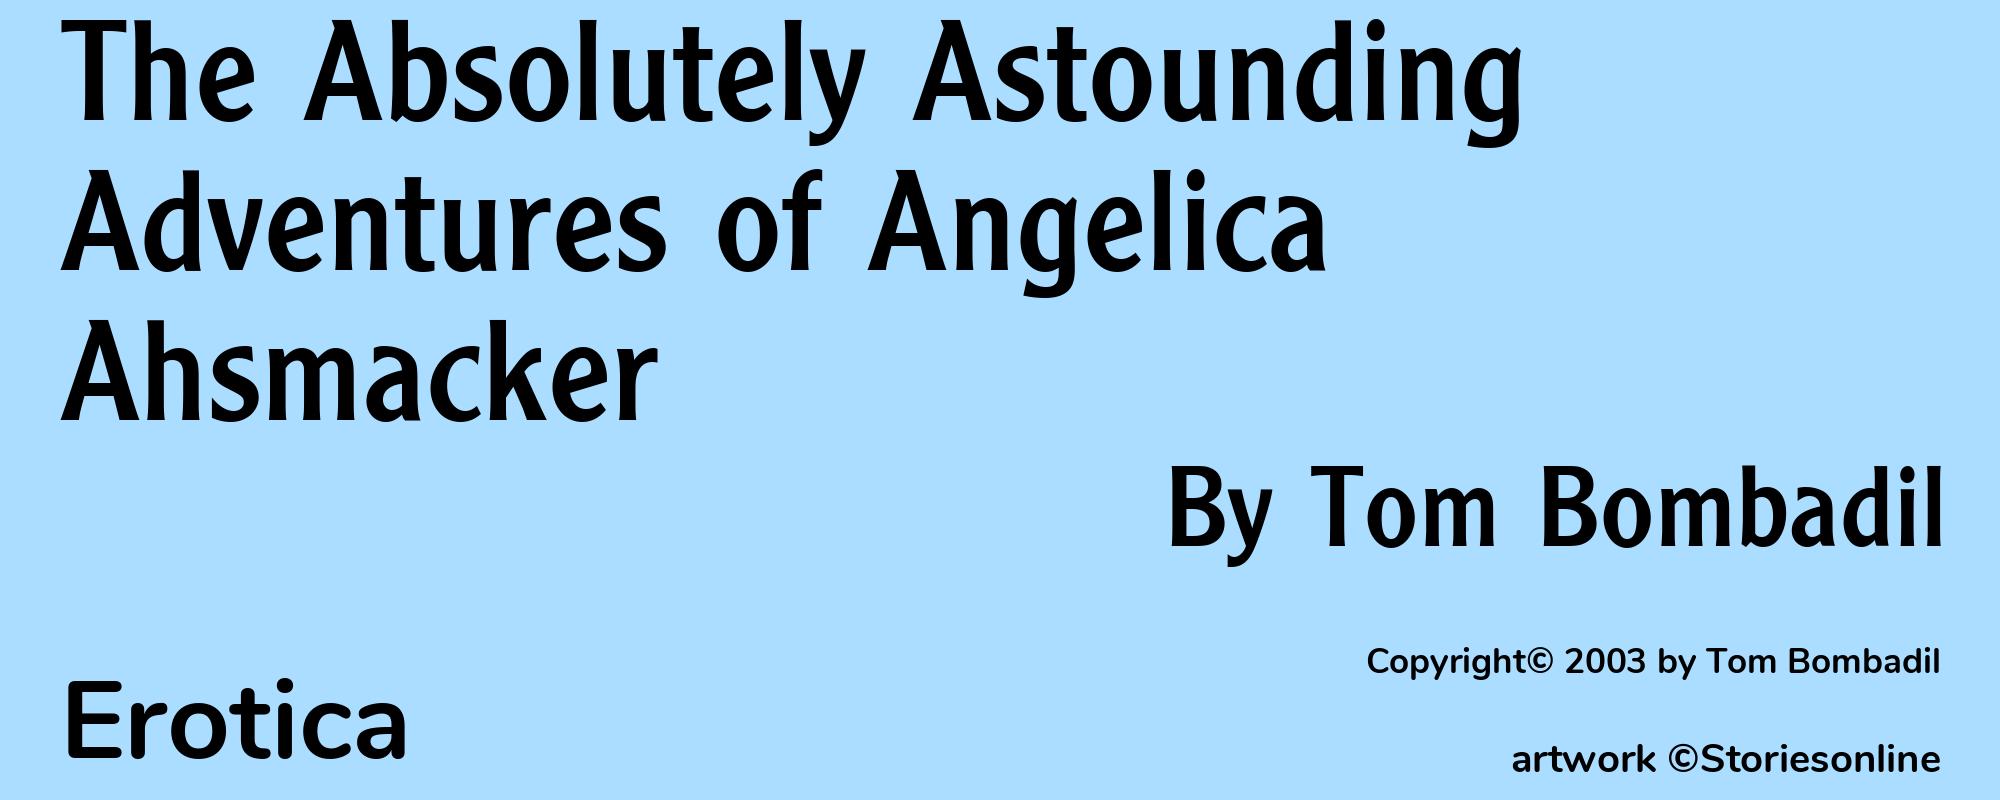 The Absolutely Astounding Adventures of Angelica Ahsmacker - Cover